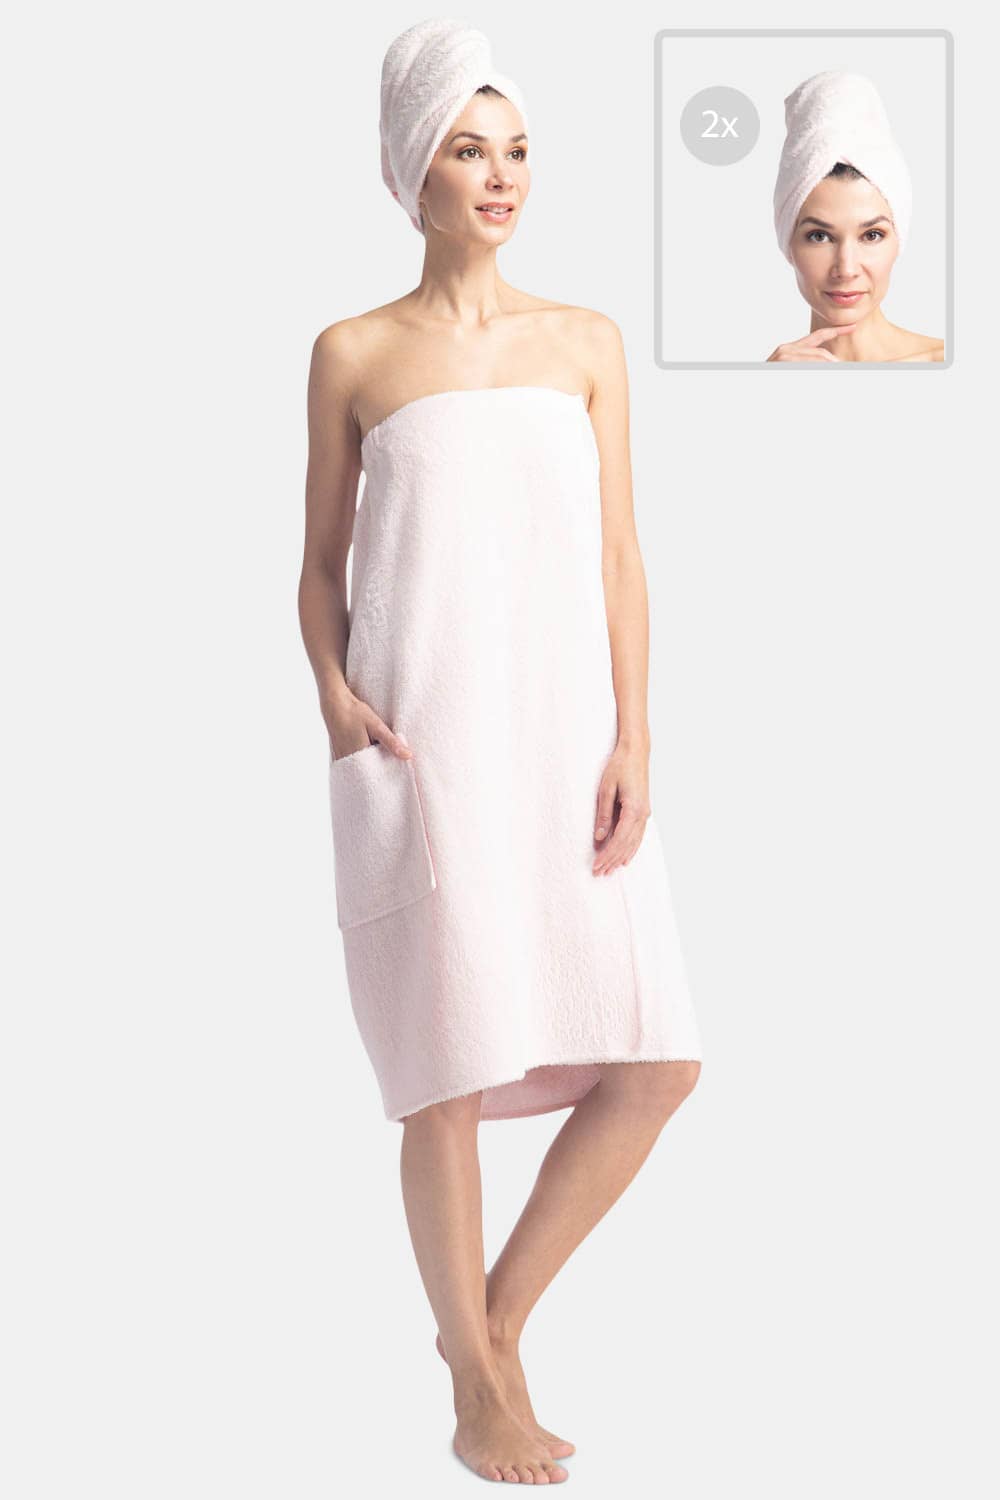 Women's Terry Cloth Spa Package - Body Wrap and Hair Towel Womens>Spa>Set Fishers Finery One-Size Heavenly Pink 2